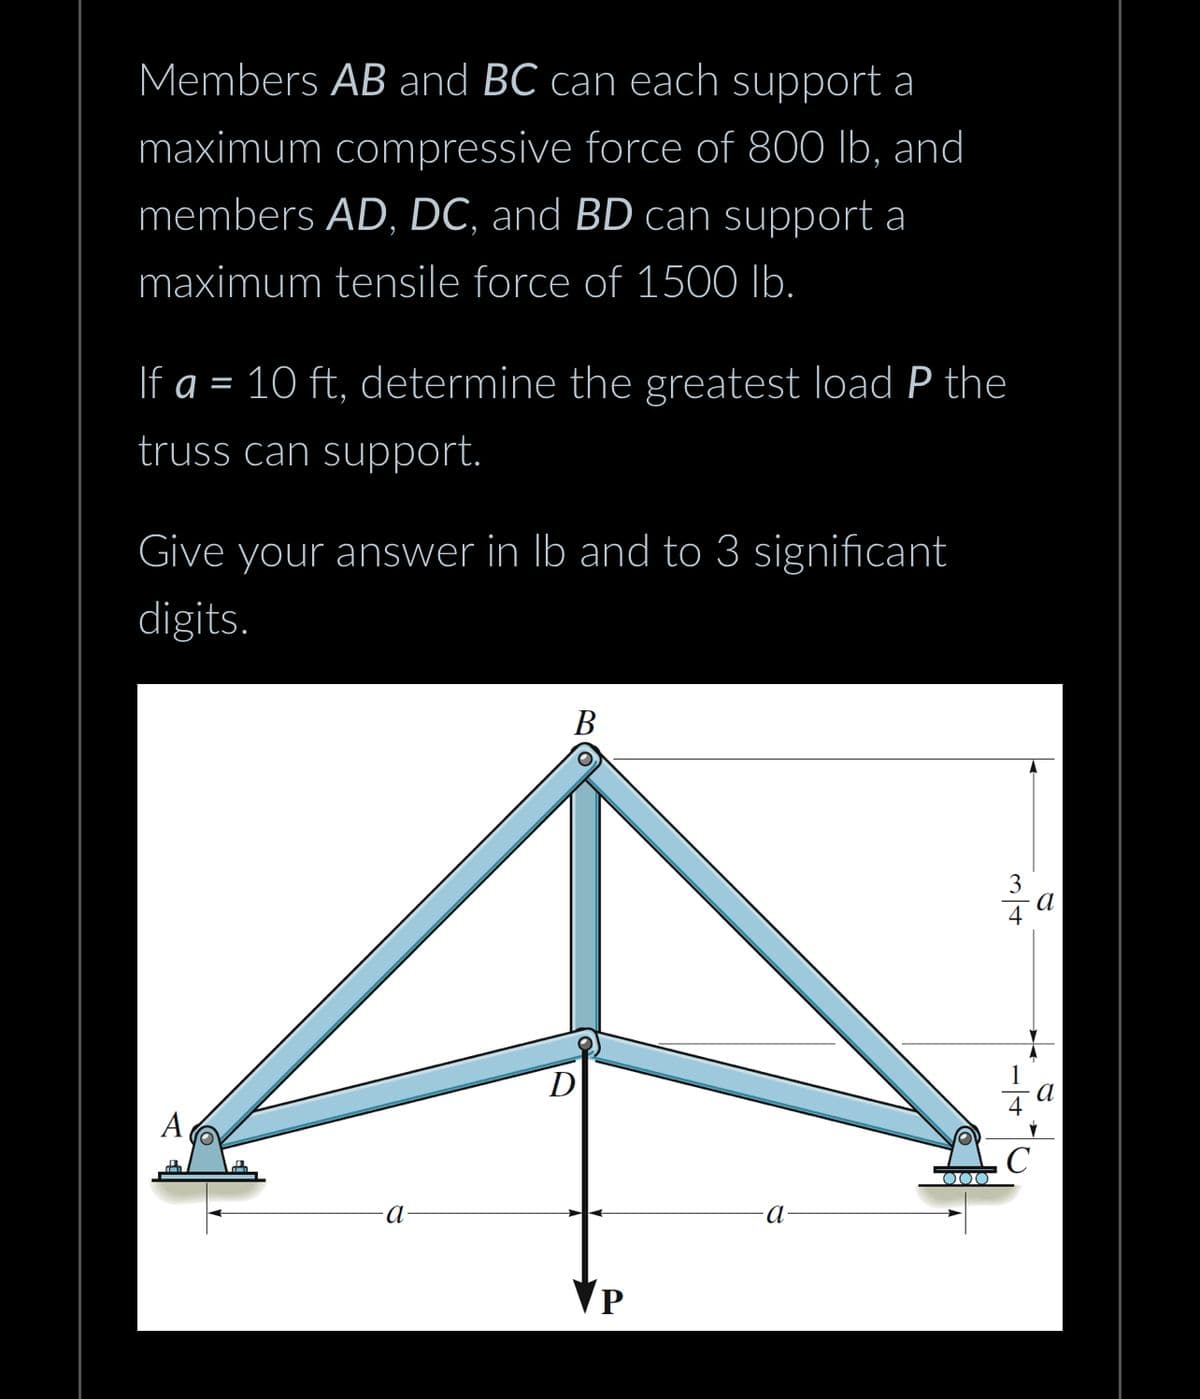 Members AB and BC can each support a
maximum compressive force of 800 lb, and
members AD, DC, and BD can support a
maximum tensile force of 1500 lb.
If a = 10 ft, determine the greatest load P the
truss can support.
Give your answer in lb and to 3 significant
digits.
-a-
B
D
VP